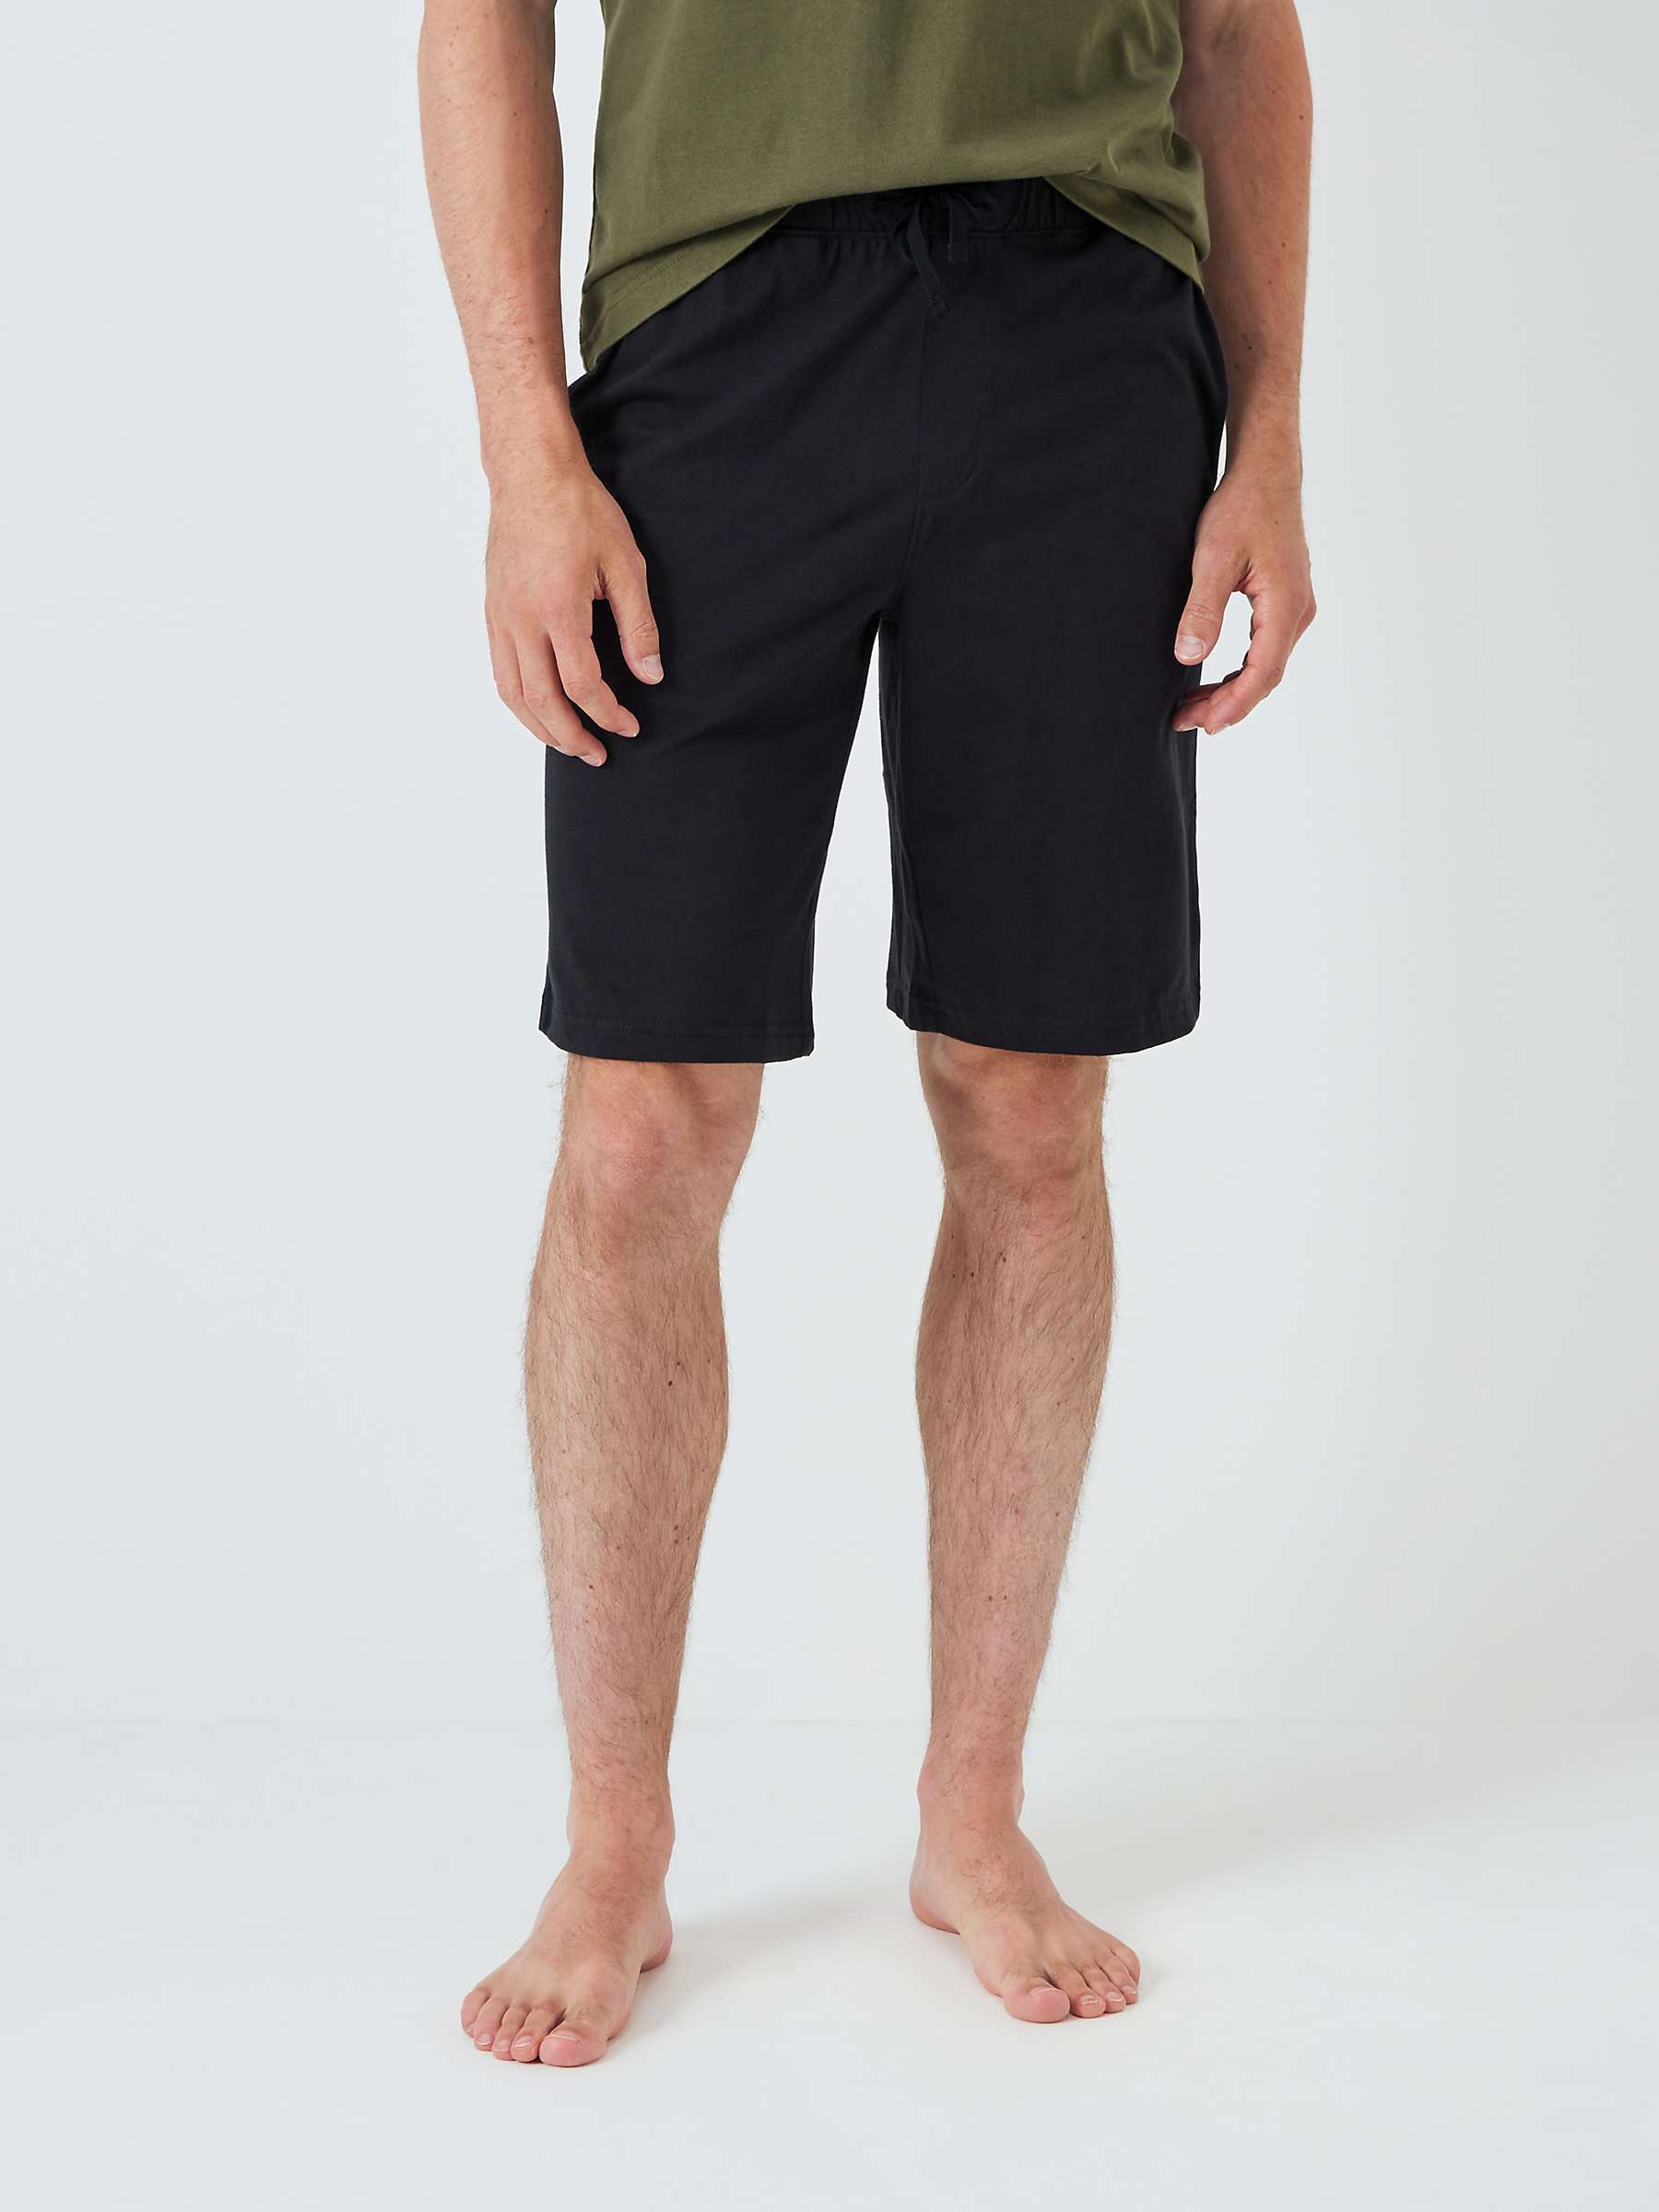 Buy John Lewis ANYDAY Cotton Jersey Shorts, Pack of 2, Black/Grey Online at johnlewis.com